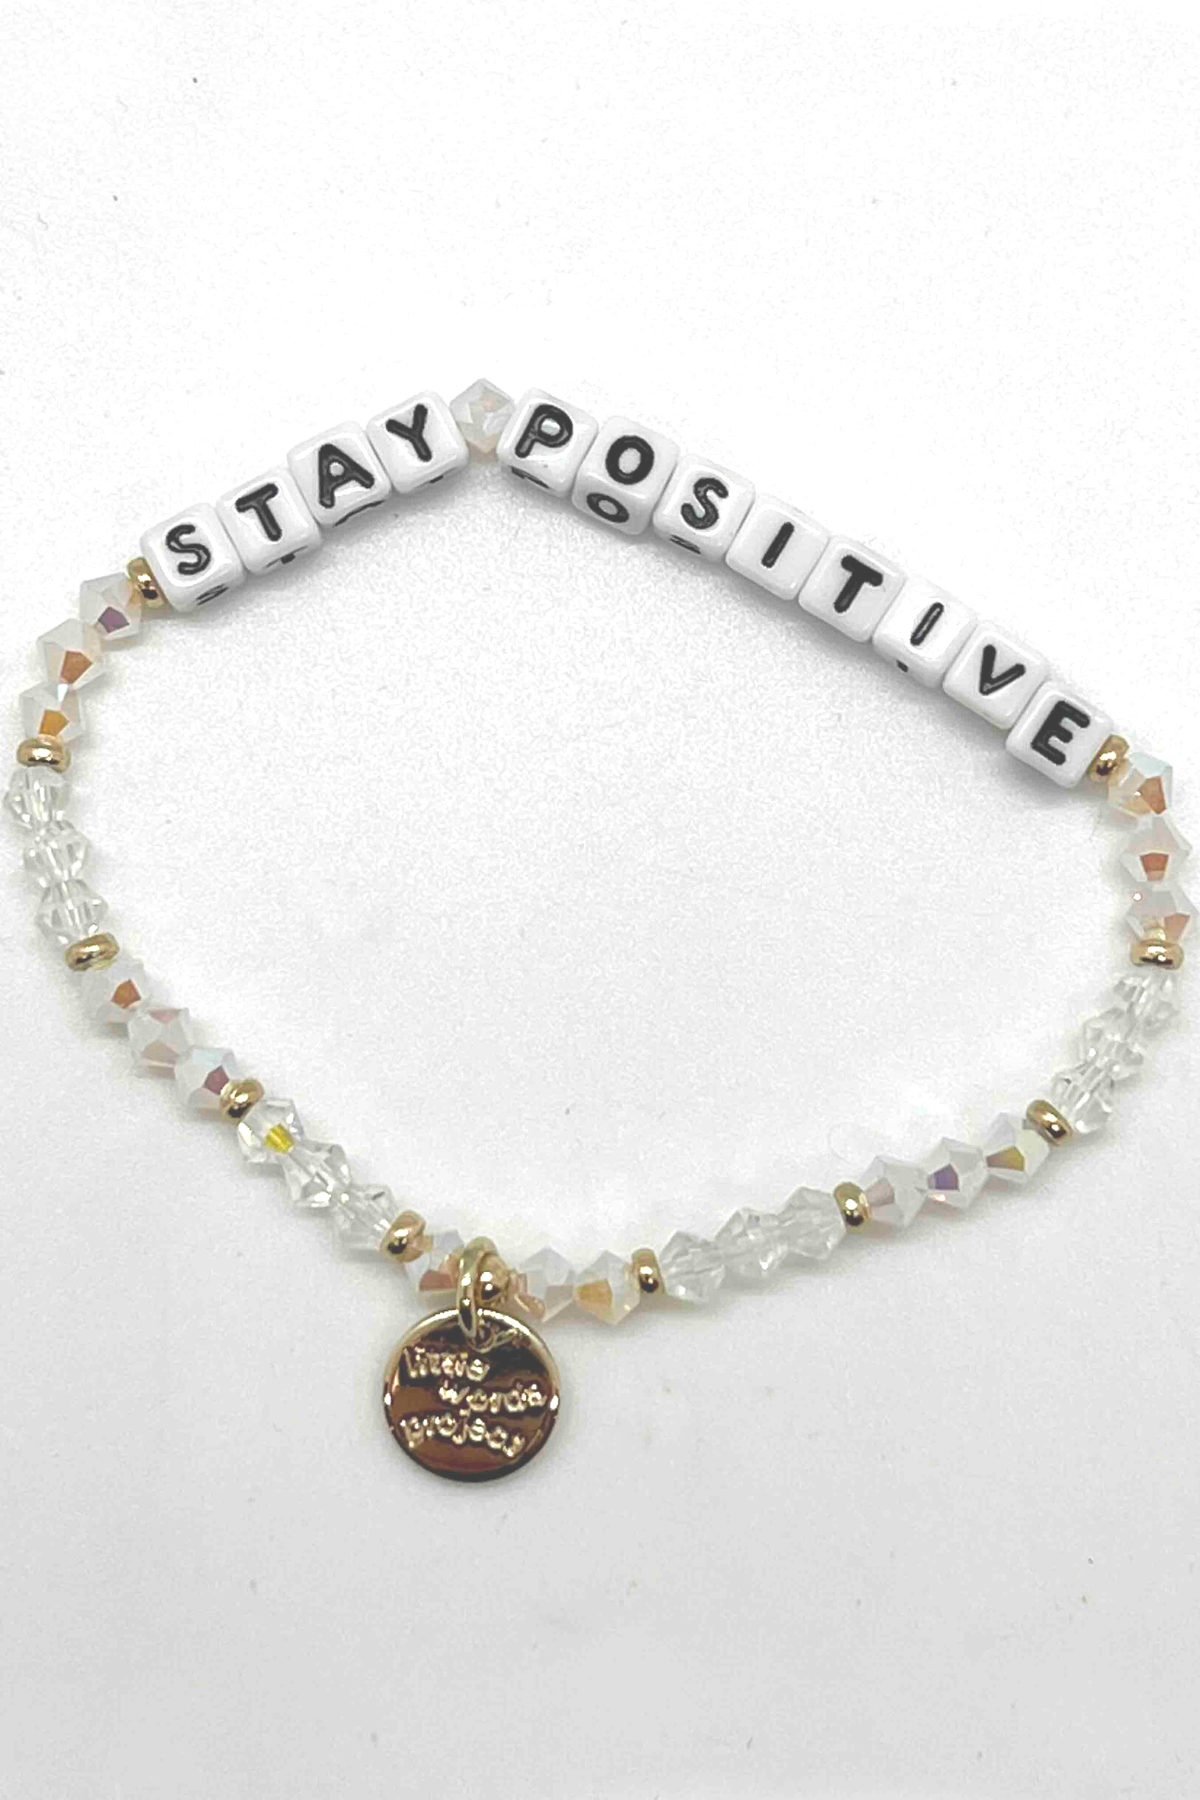 Stay Positive Crystal Word Bracelets by Little Words Project